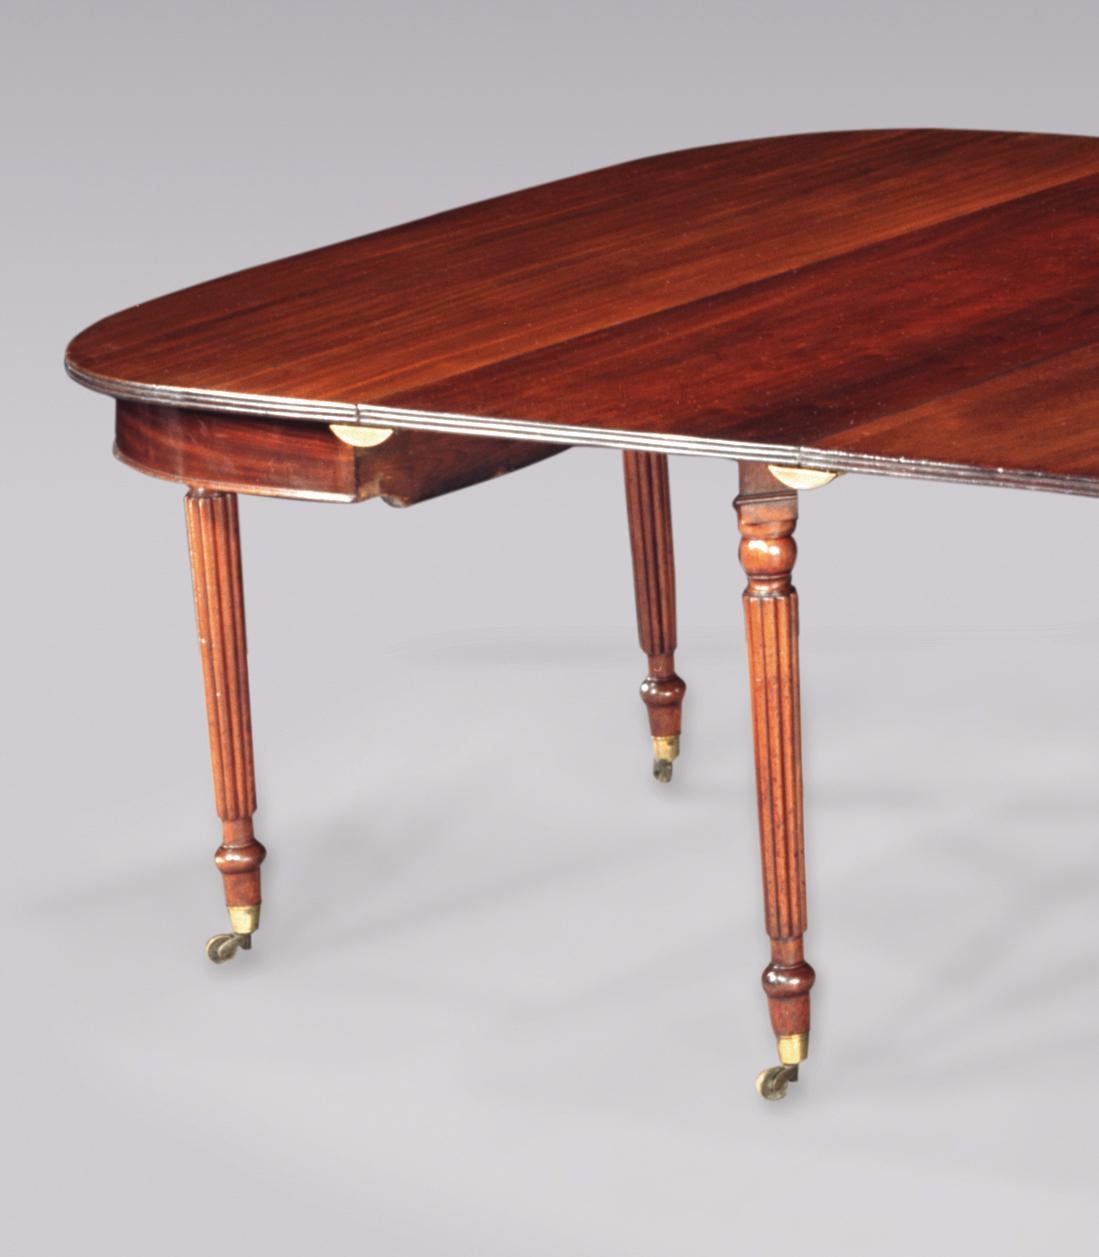 English Fine Regency Period Mahogany Extending Dining Table For Sale